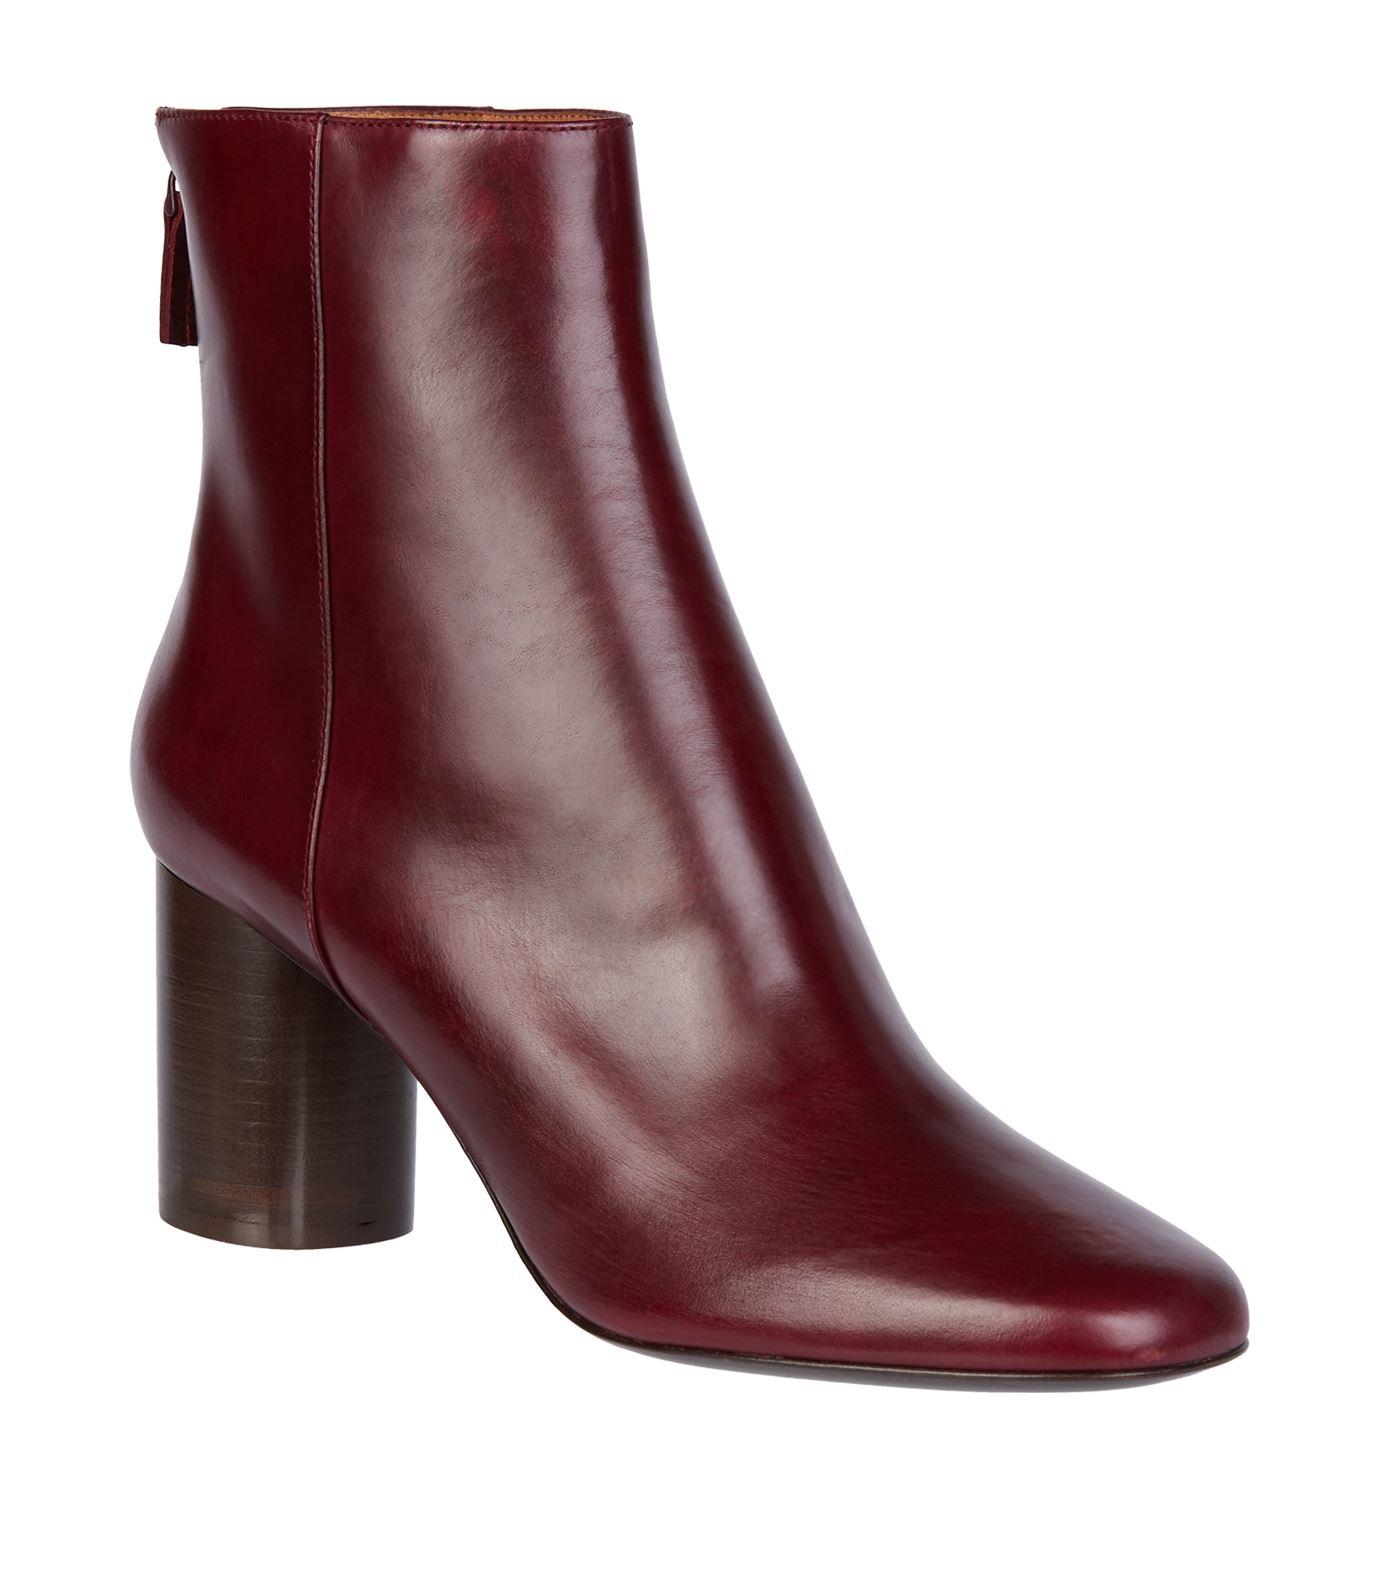 Sandro Leather Sacha Boots in Red - Lyst